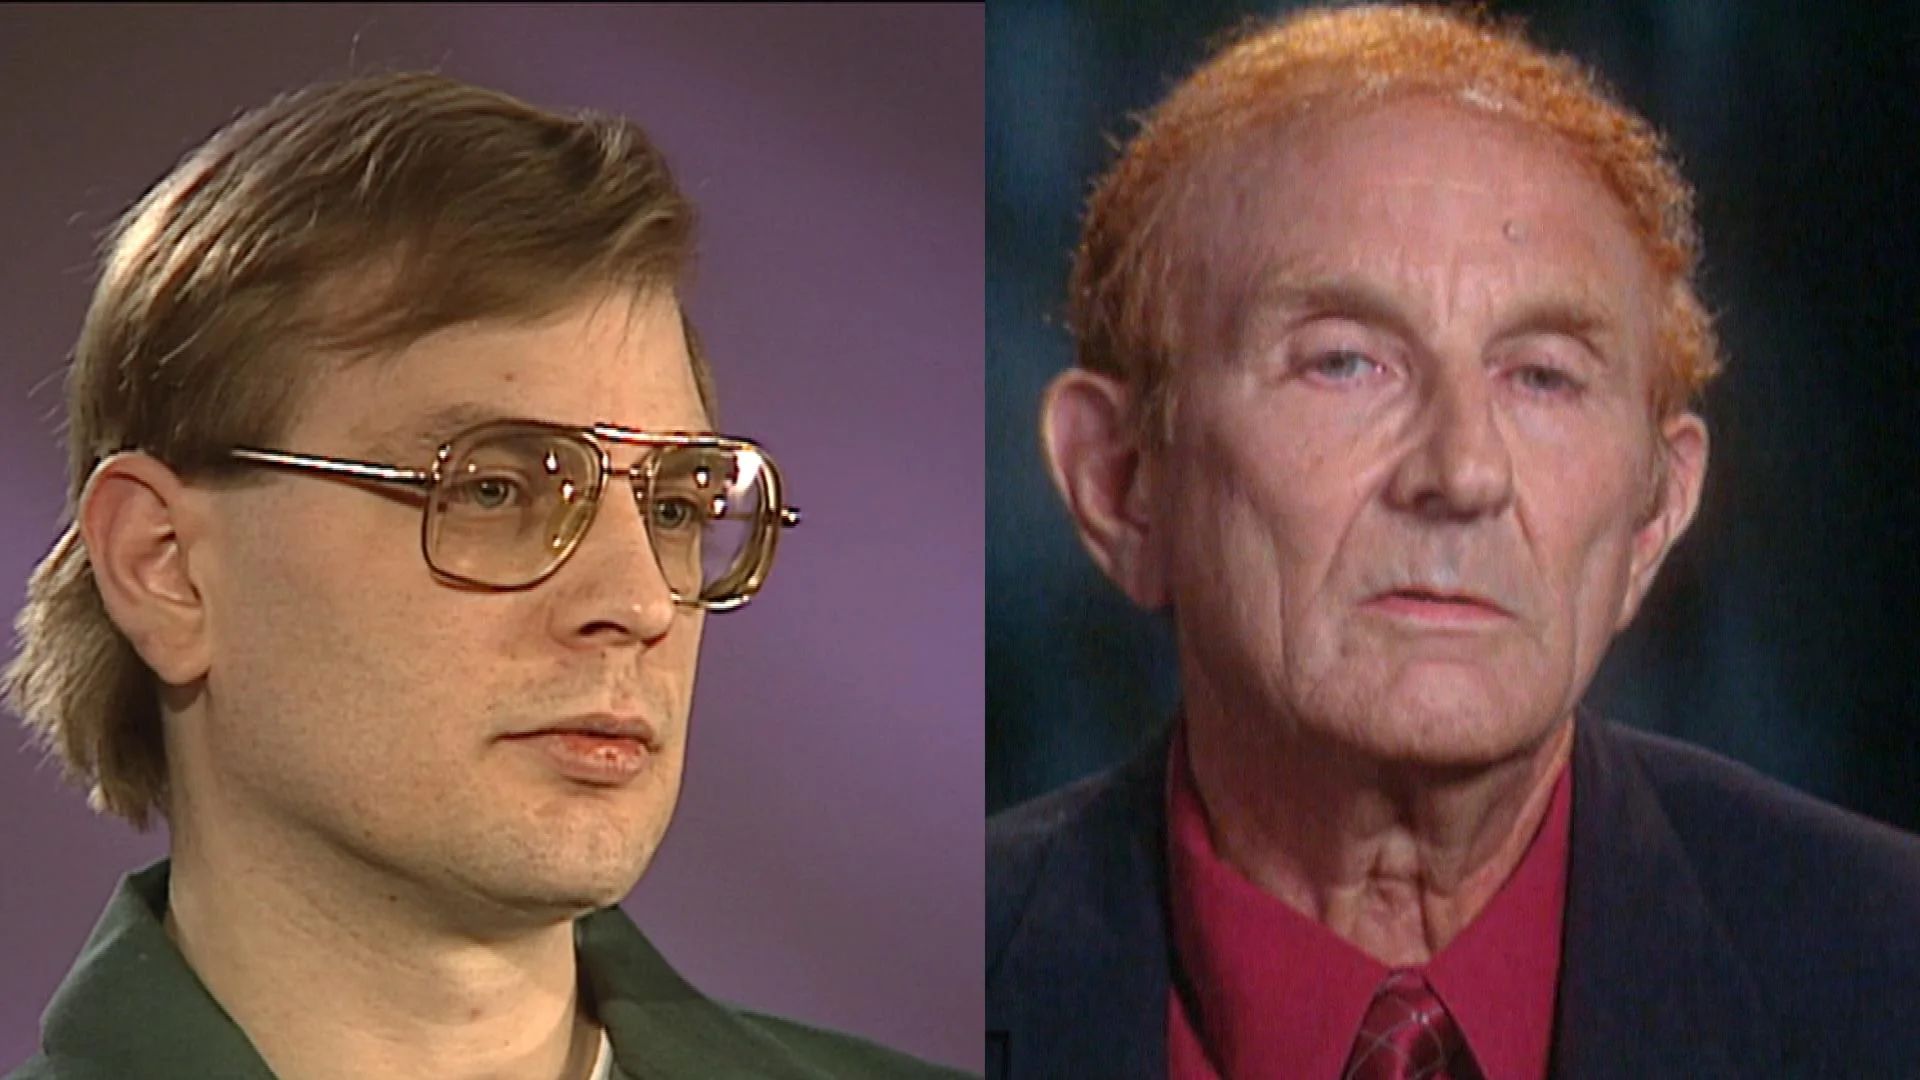 Lionel Dahmer, Father Of Notorious Serial Killer Jeffrey Dahmer, Passes Away At 87